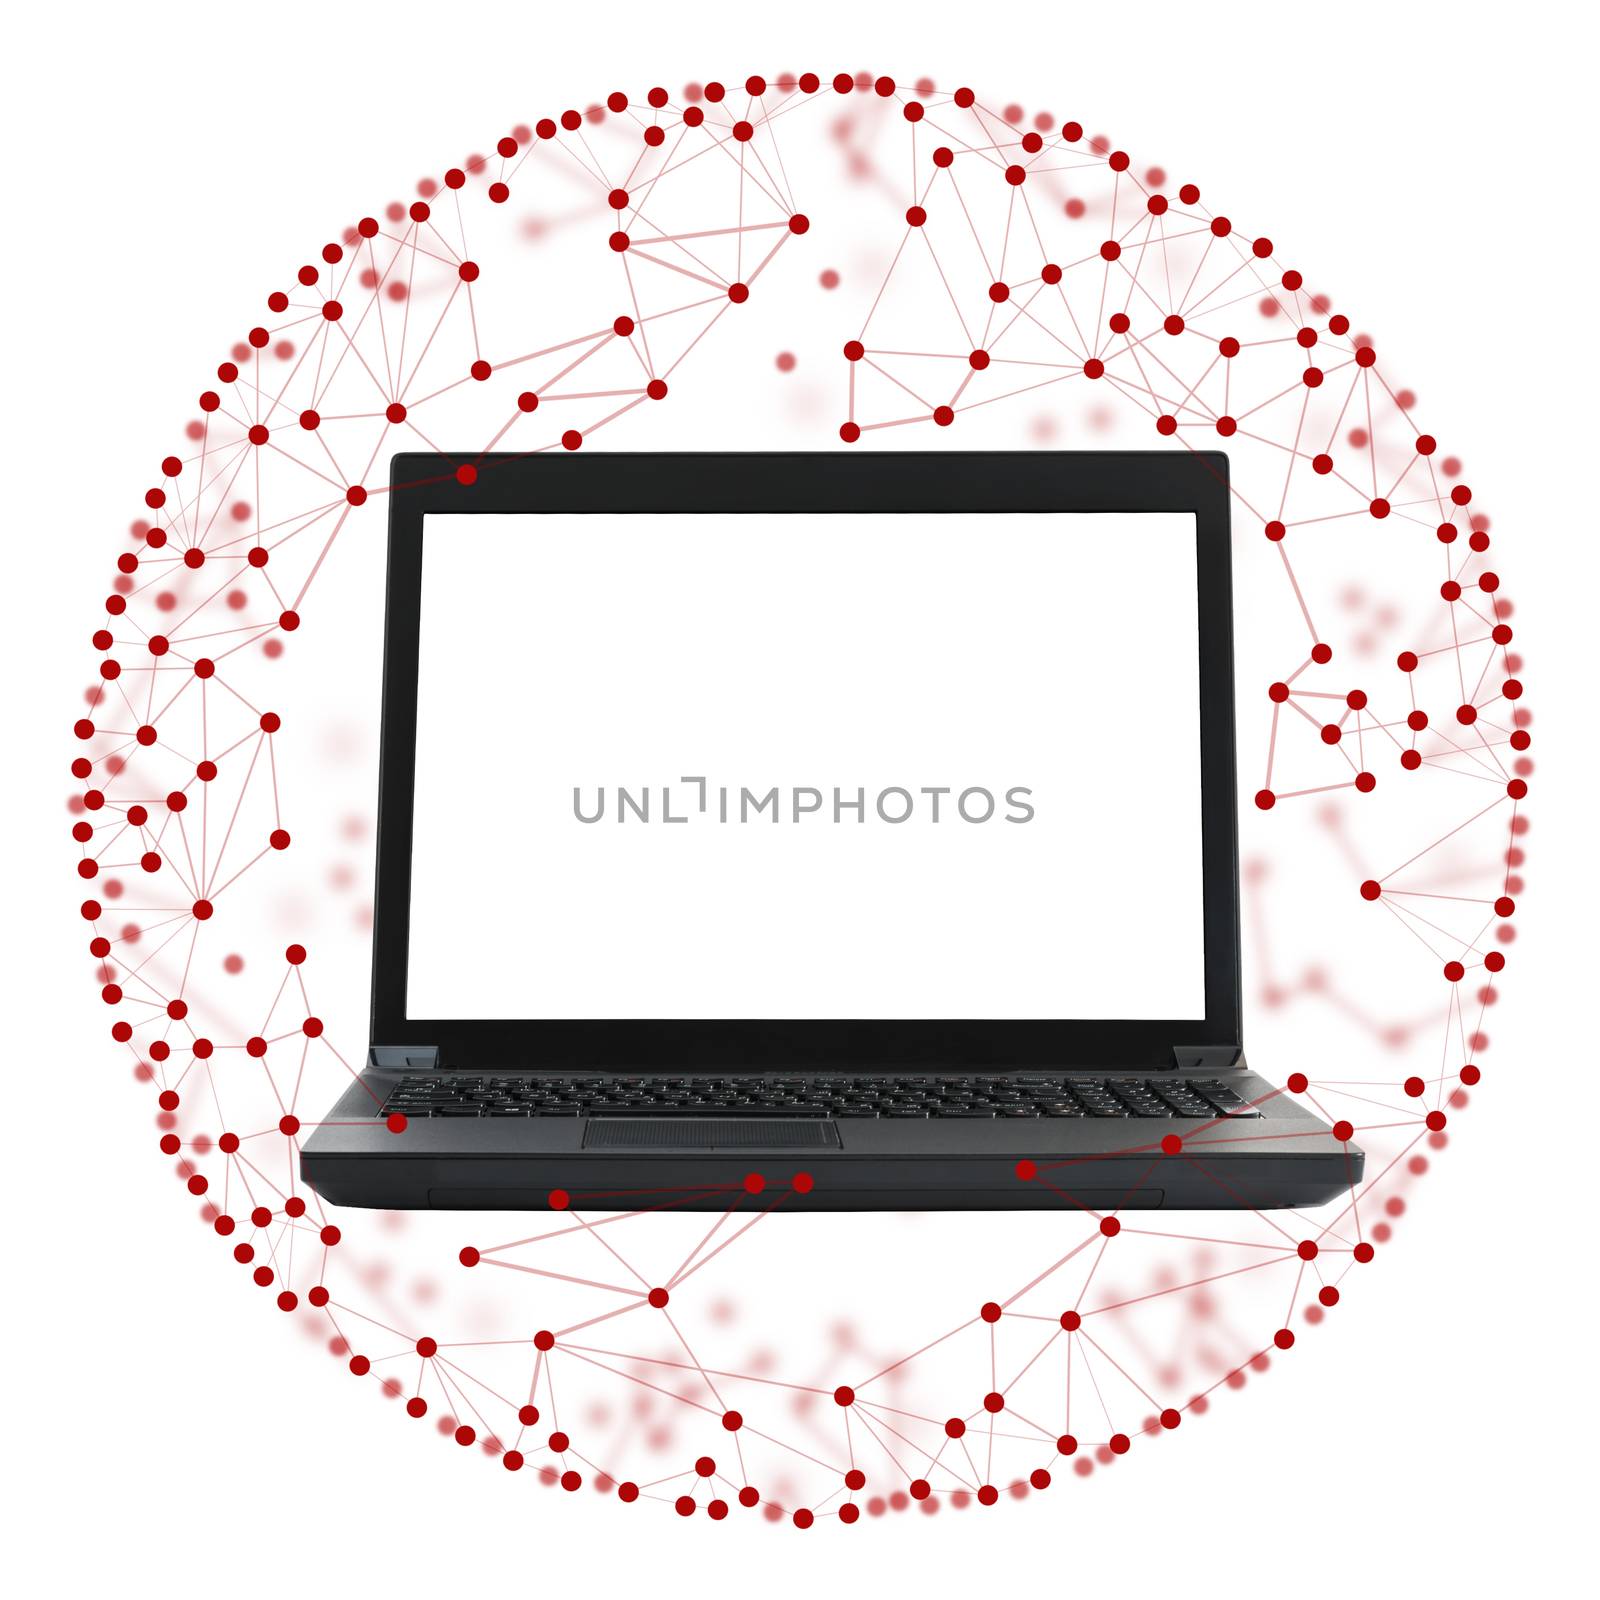 Laptop with blank screen on white background with red dots